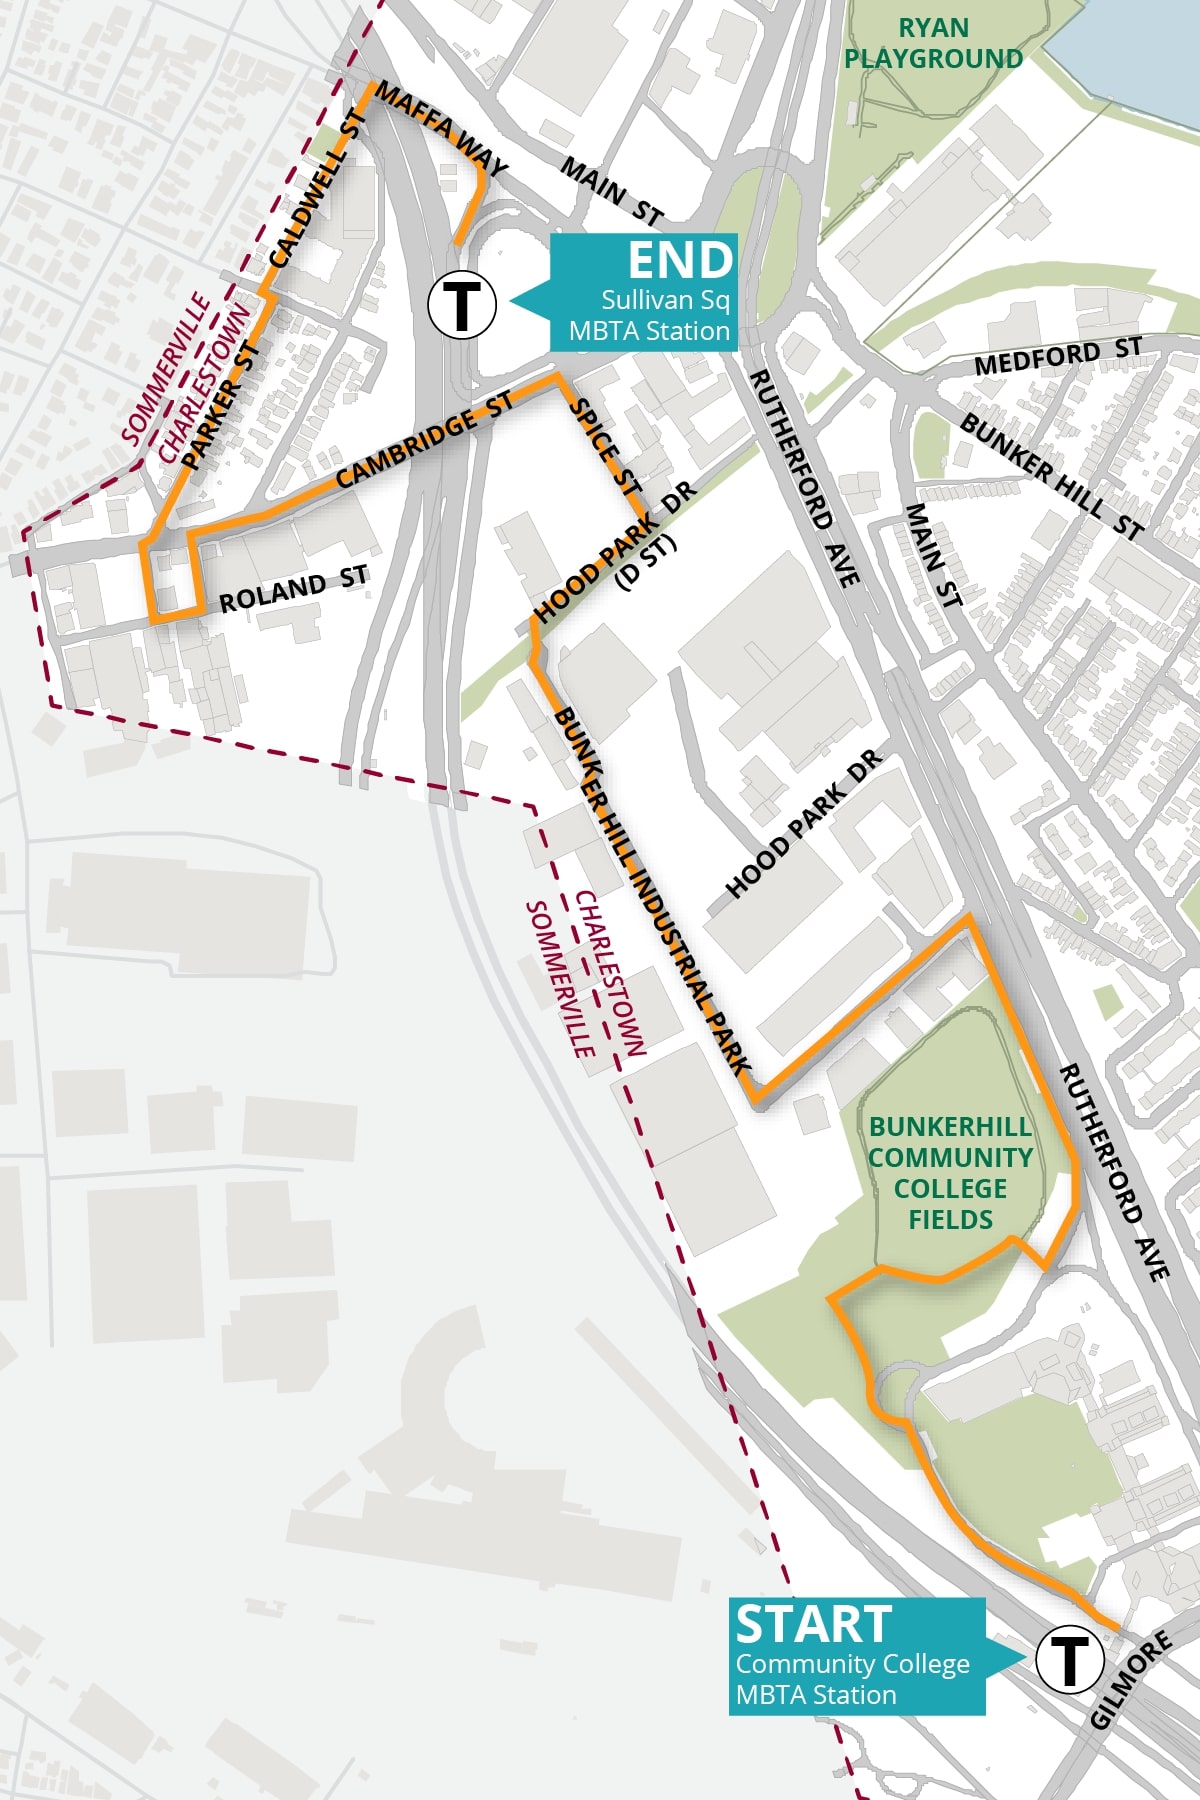 PLAN Charlestown Walking Tour route map from Community College t stop to Sullivan Square